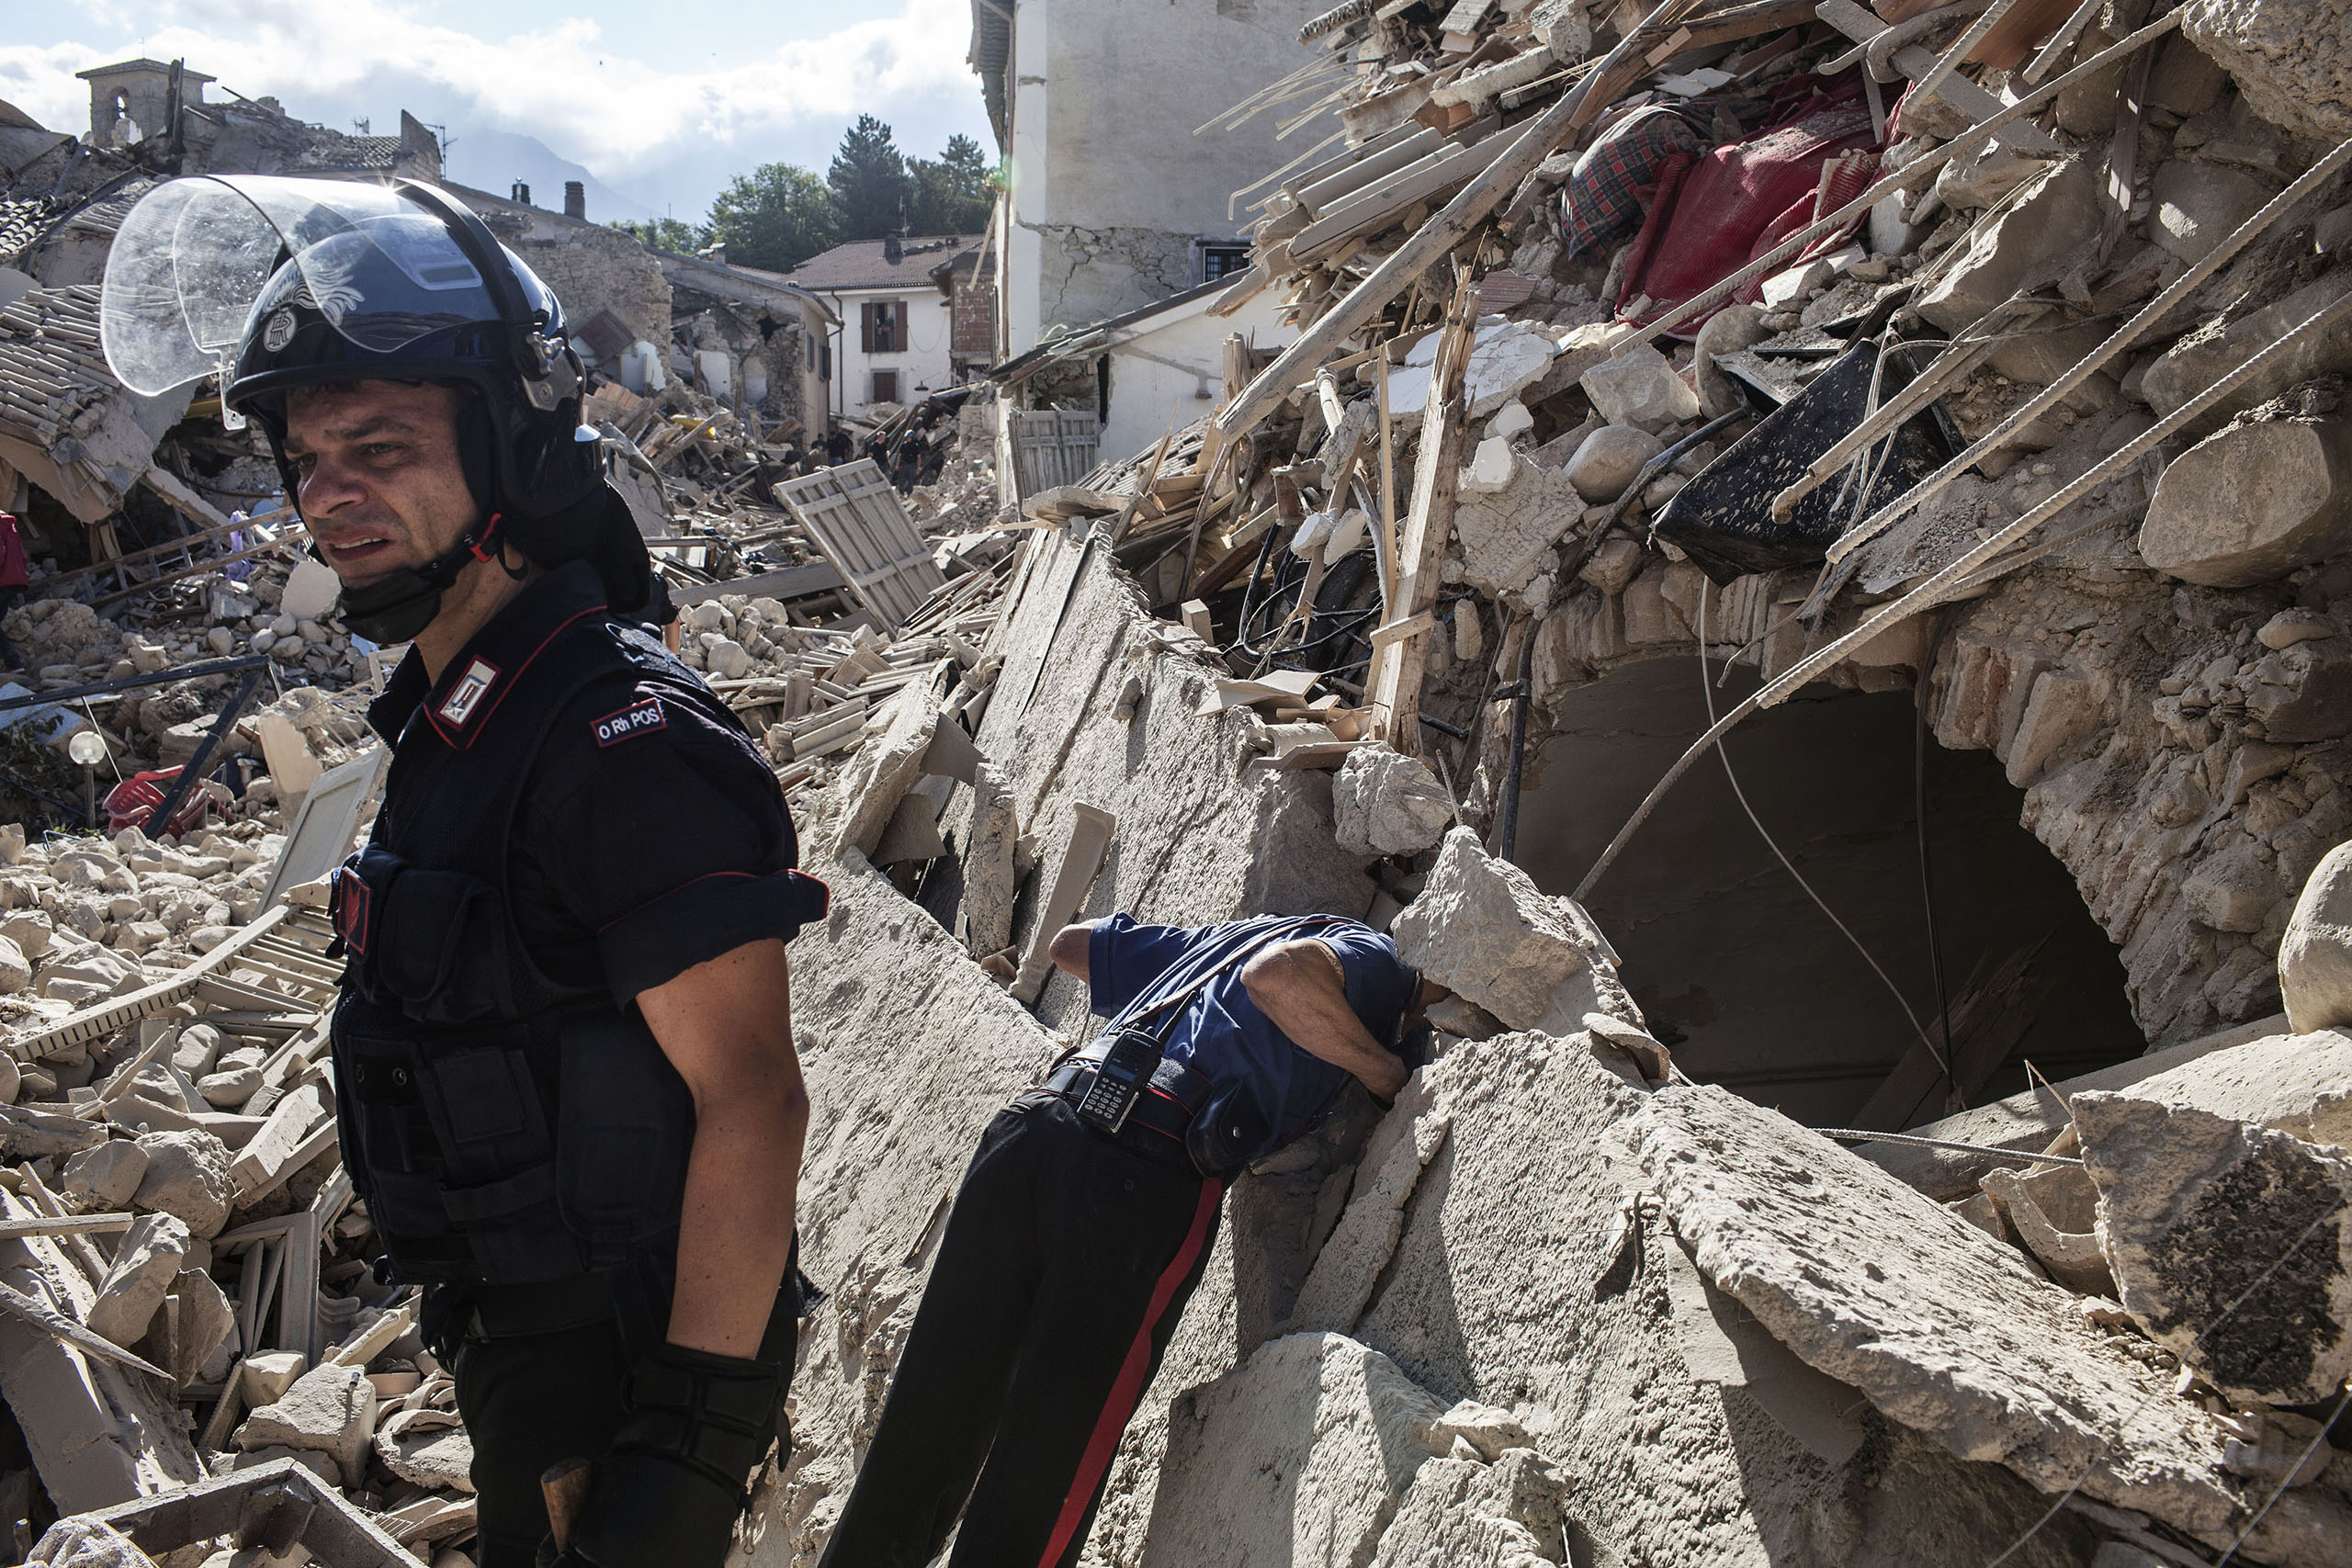 Authorities look for survivors in the rubble of the town of Amatrice, Italy, on Aug. 24, 2016.